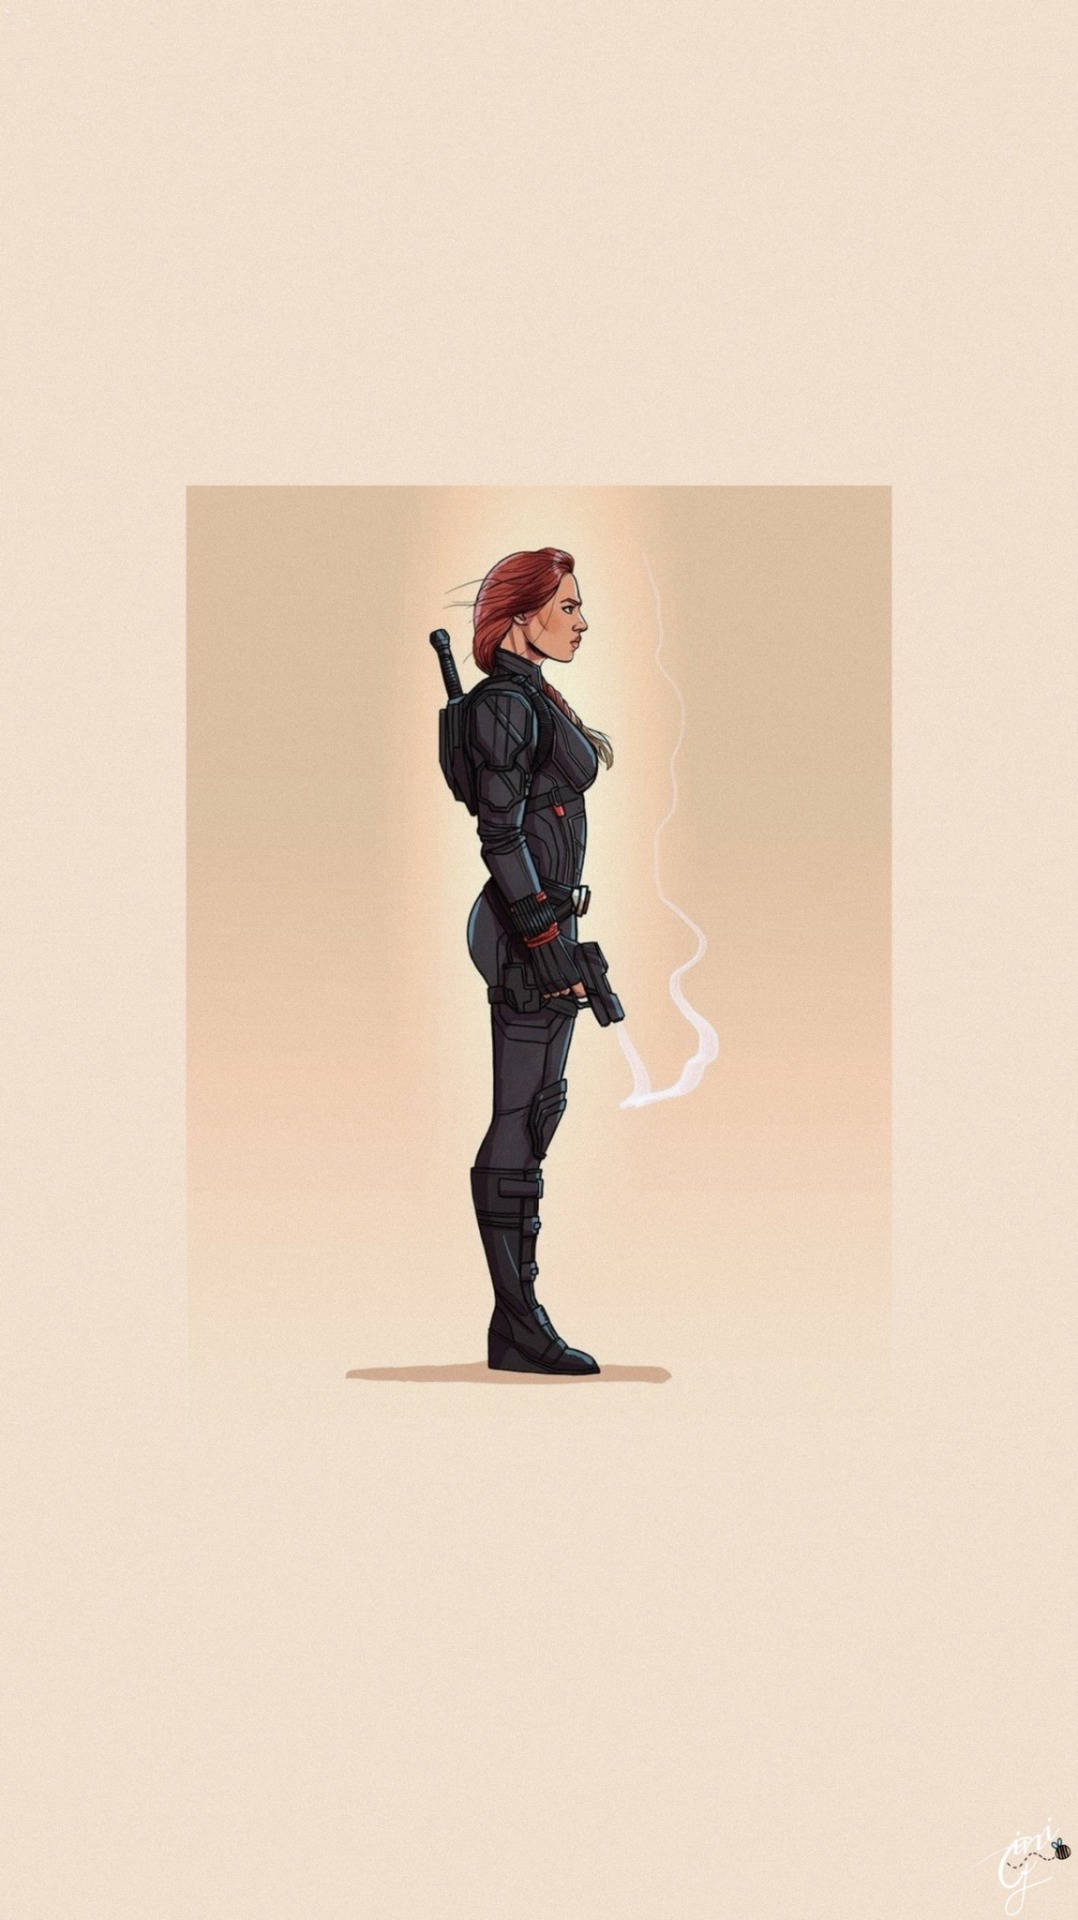 Marvel Black Widow Lateral View Wallpaper